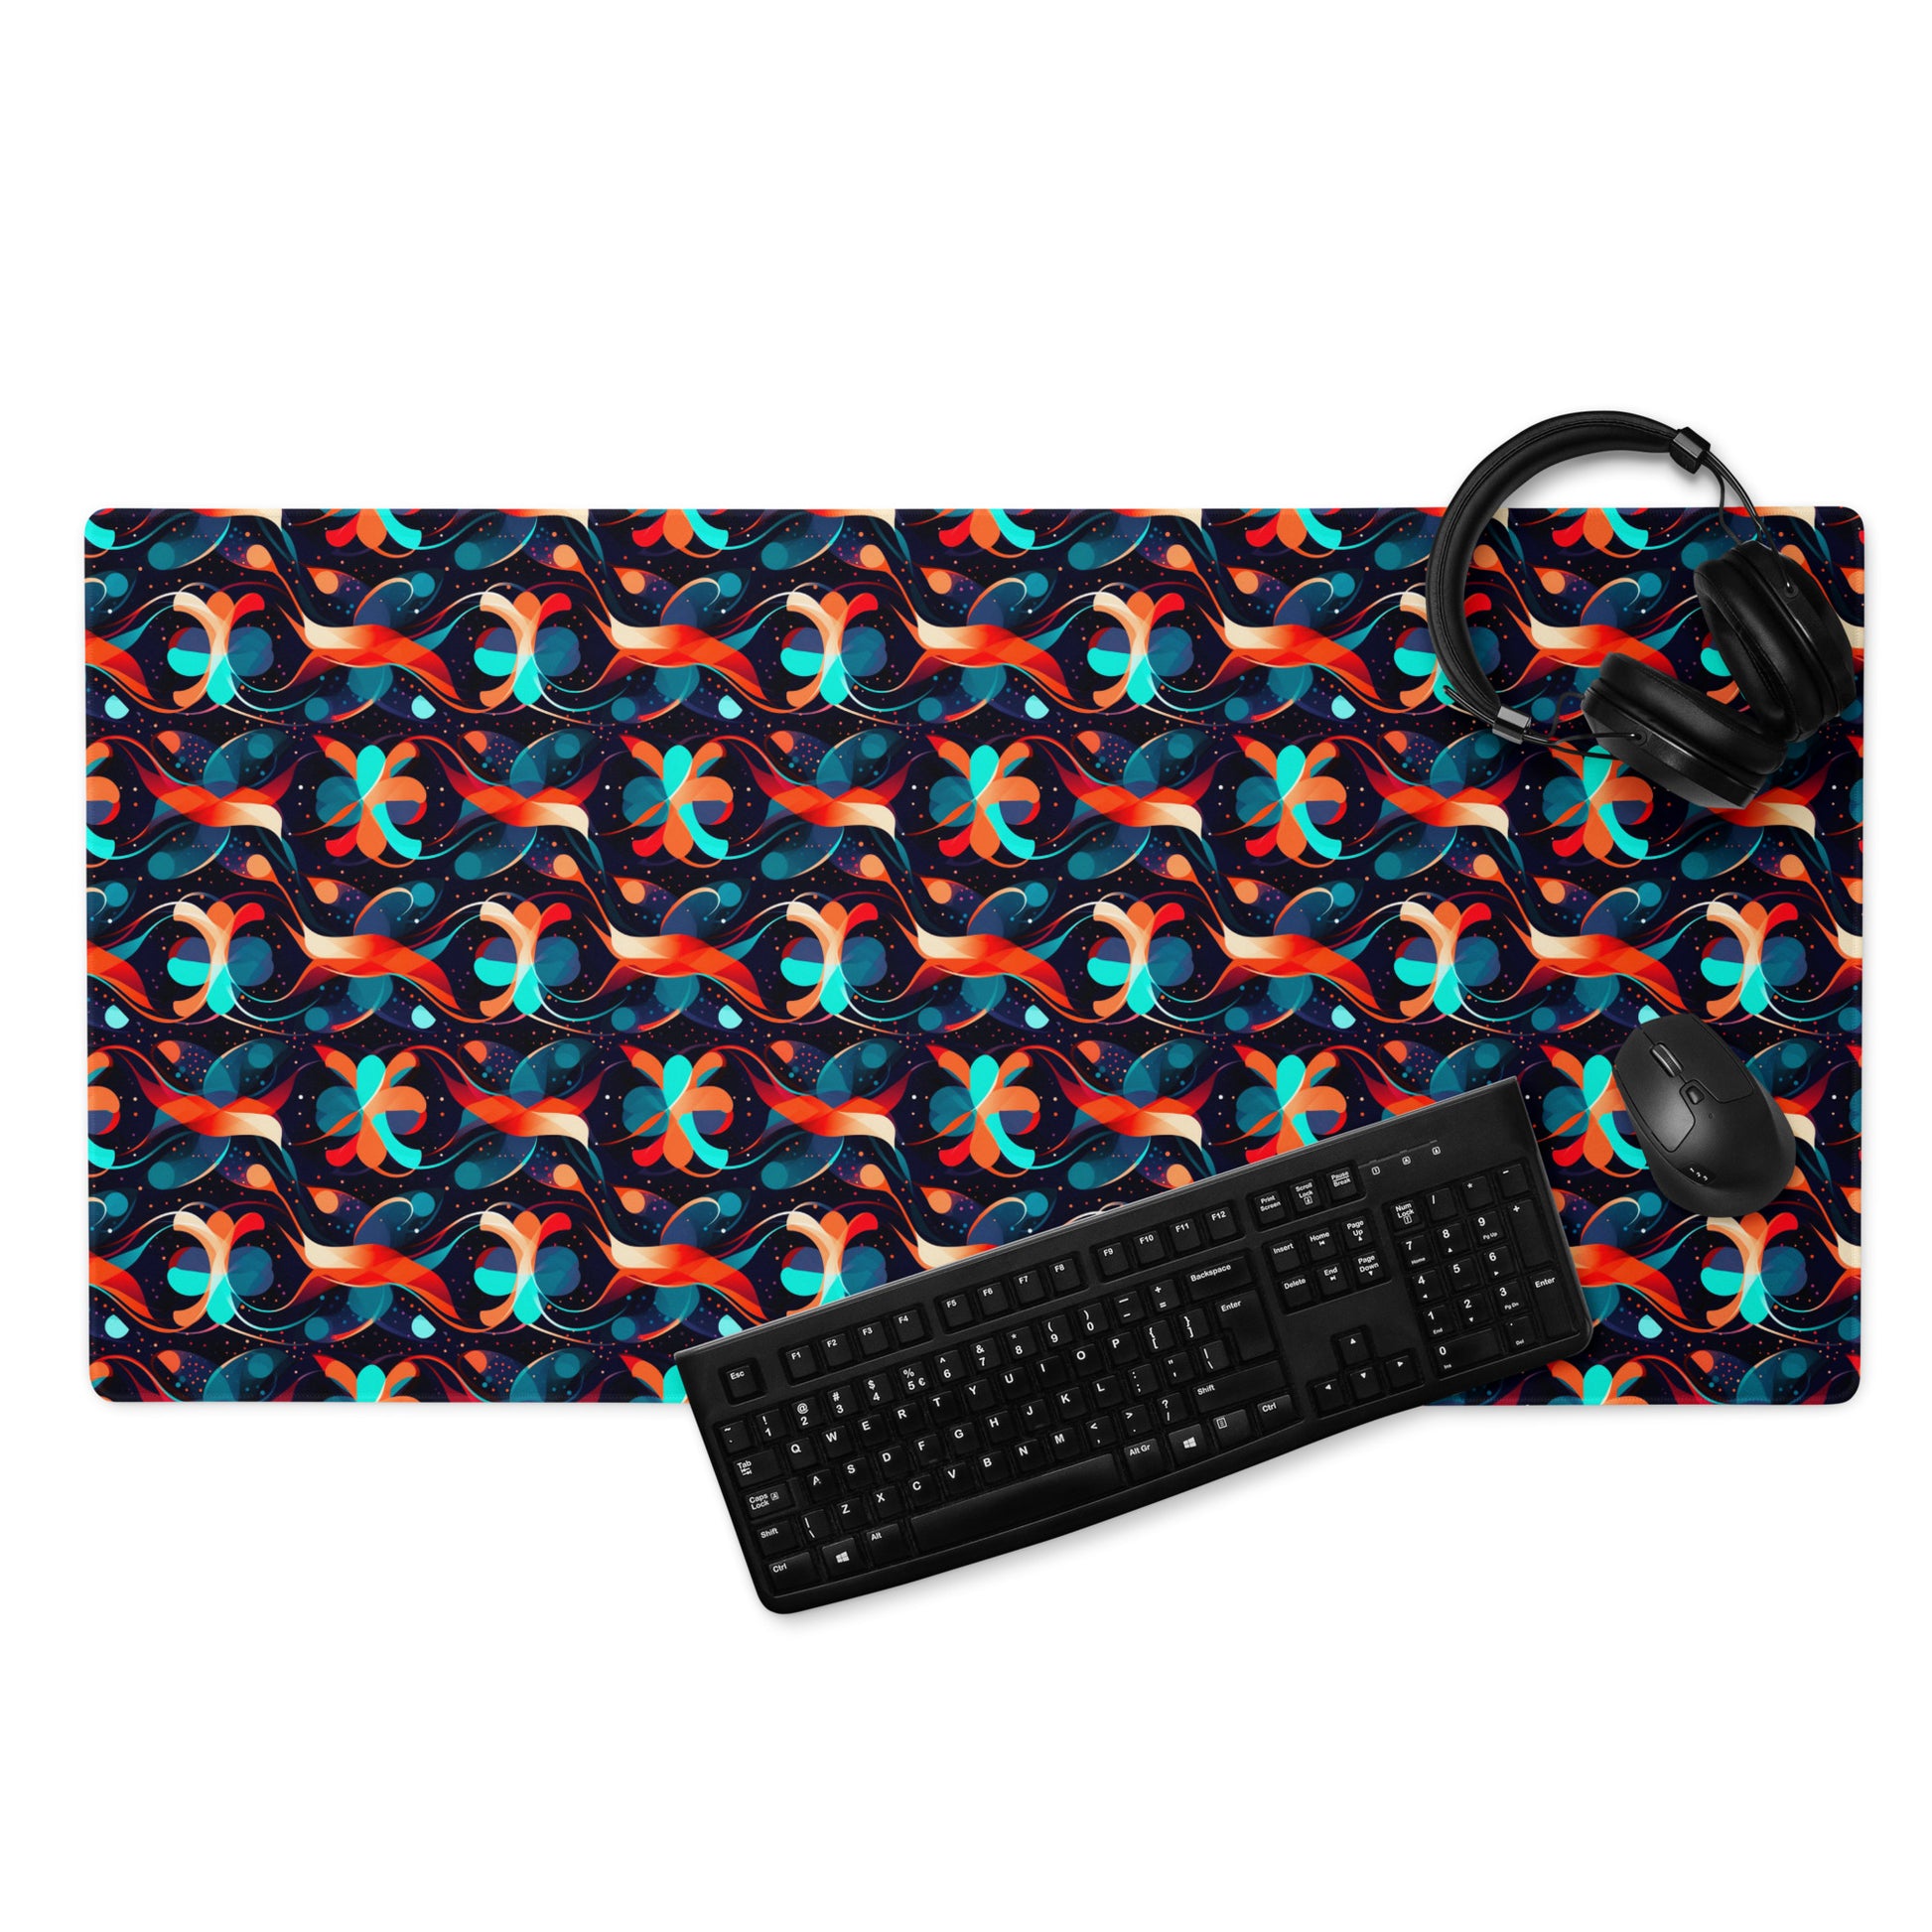 A 36" x 18" desk pad with a wavy orange and blue pattern. With a keyboard, mouse, and headphones sitting on it.